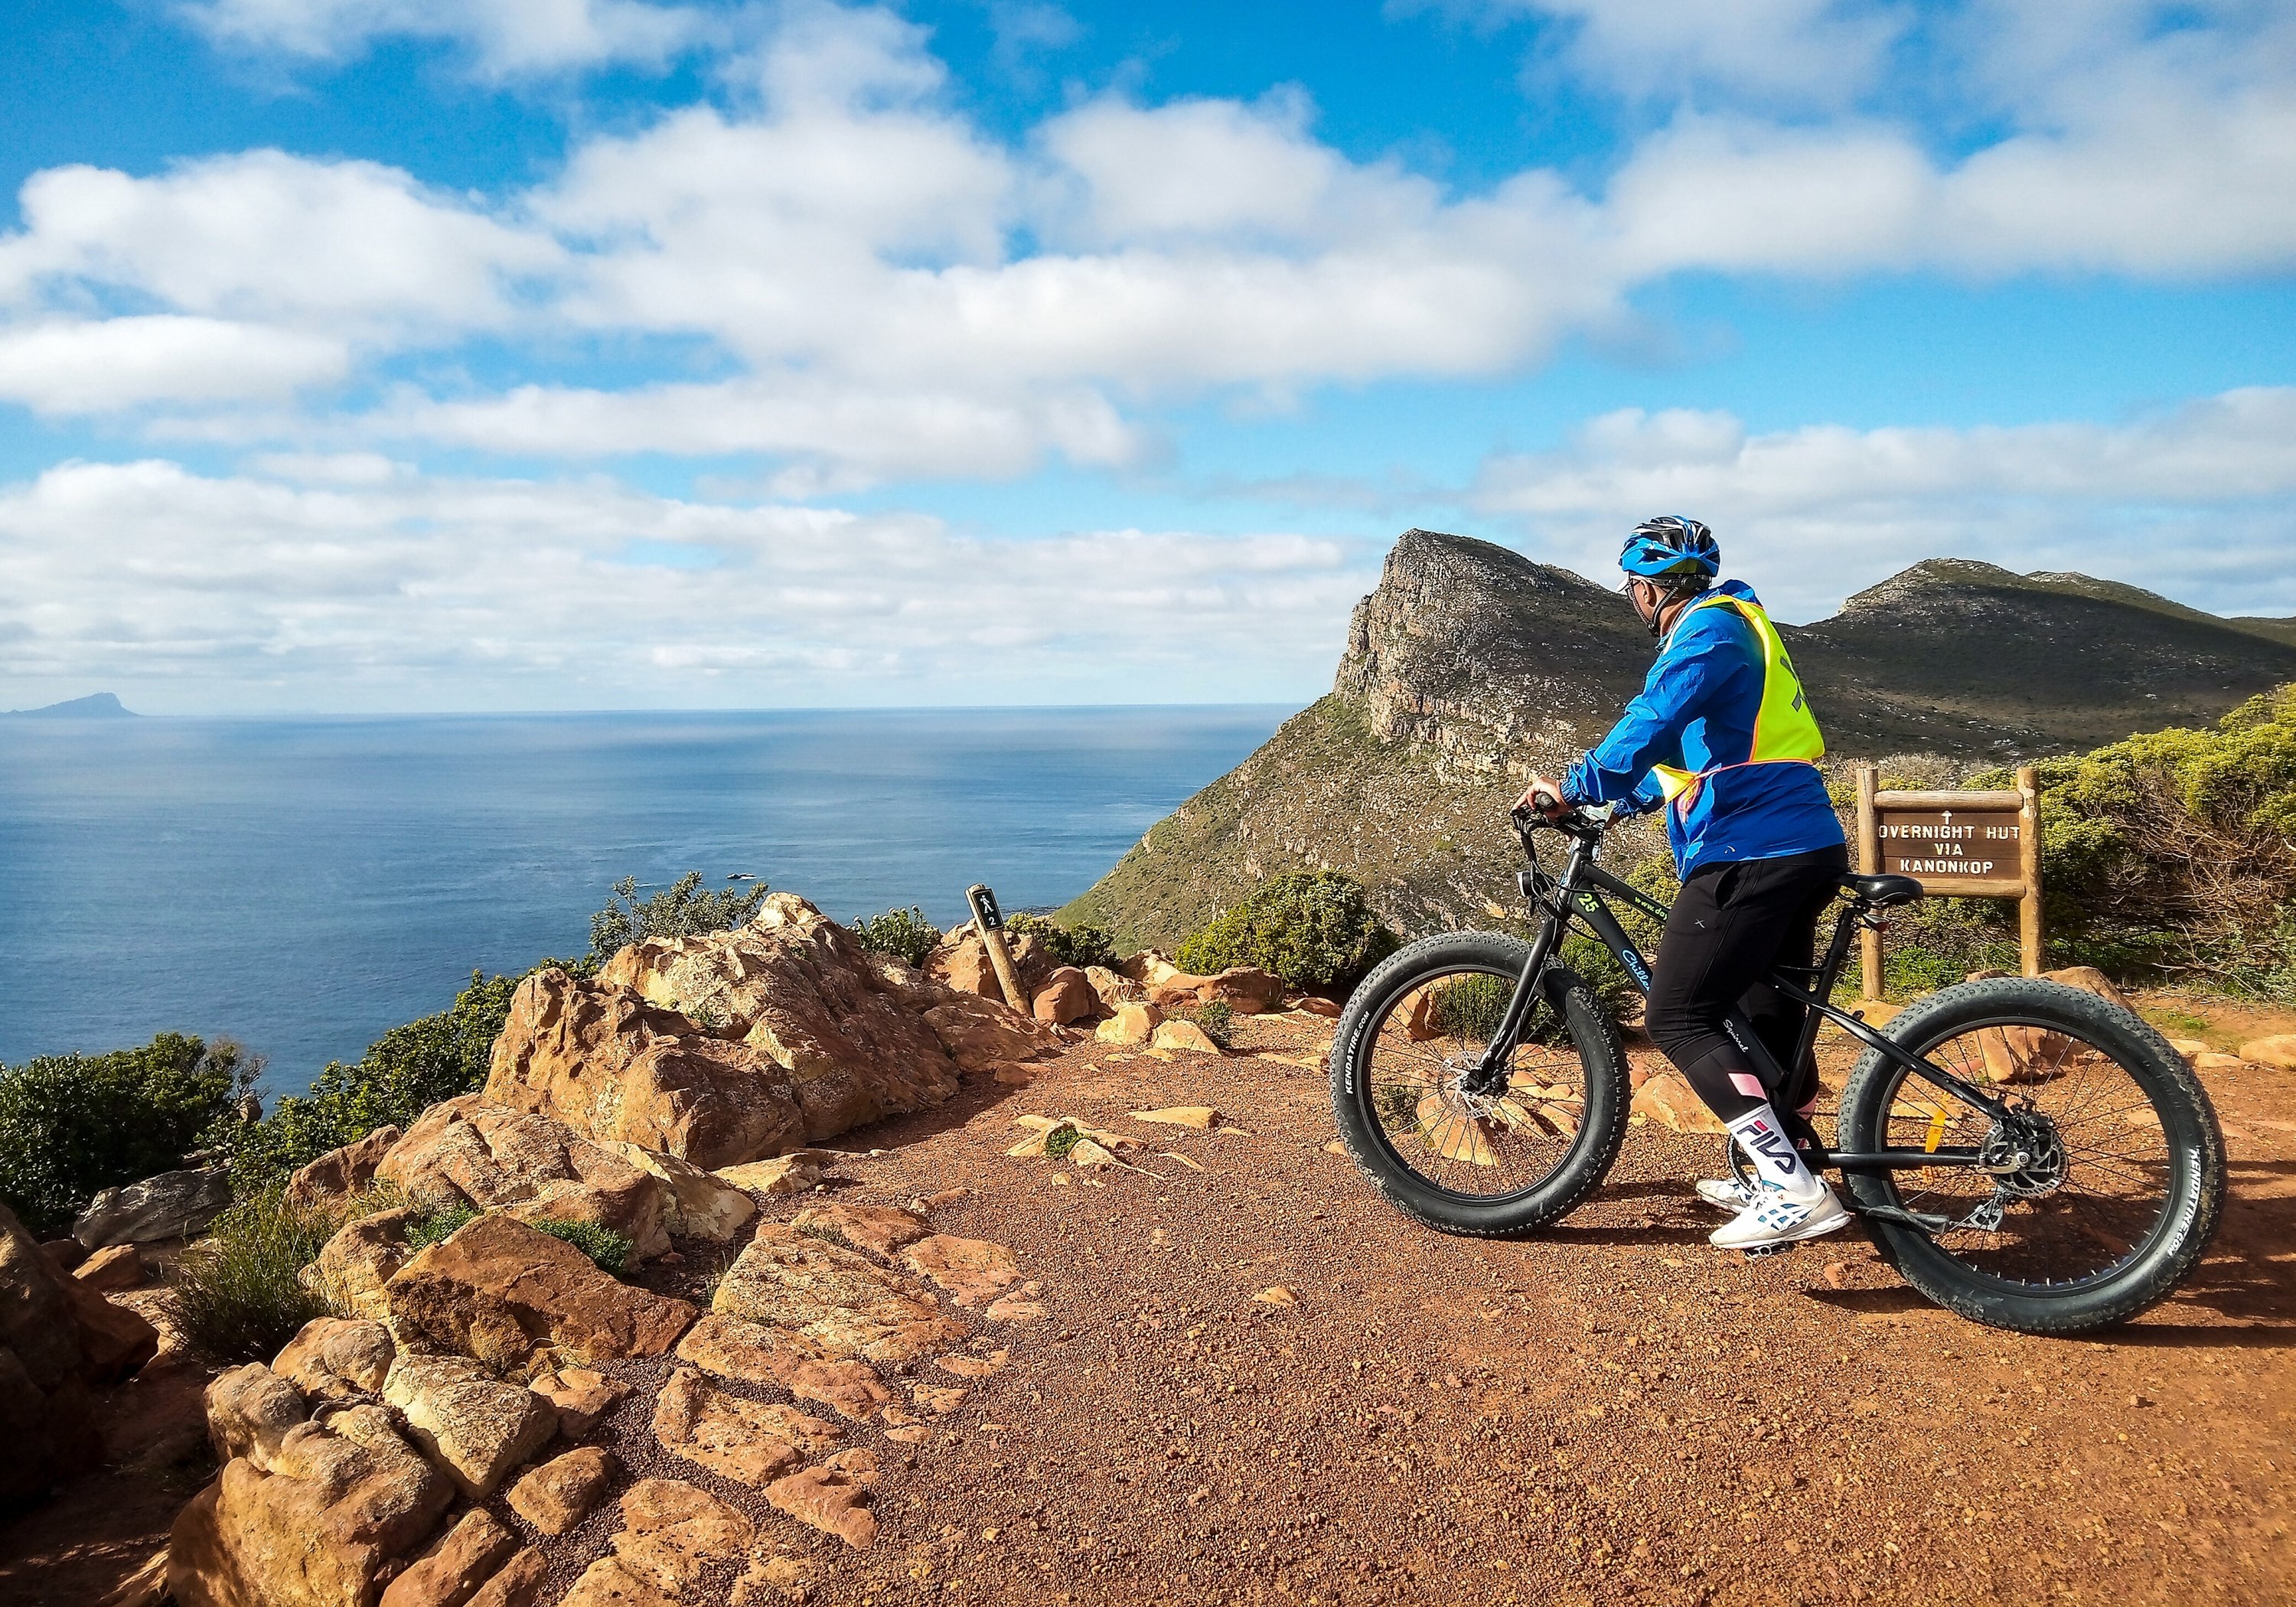  Between Cape Town and the Cape of Good Hope, there are many great choices for tours by e-bike. (Christian Selz/dpa Photo) 